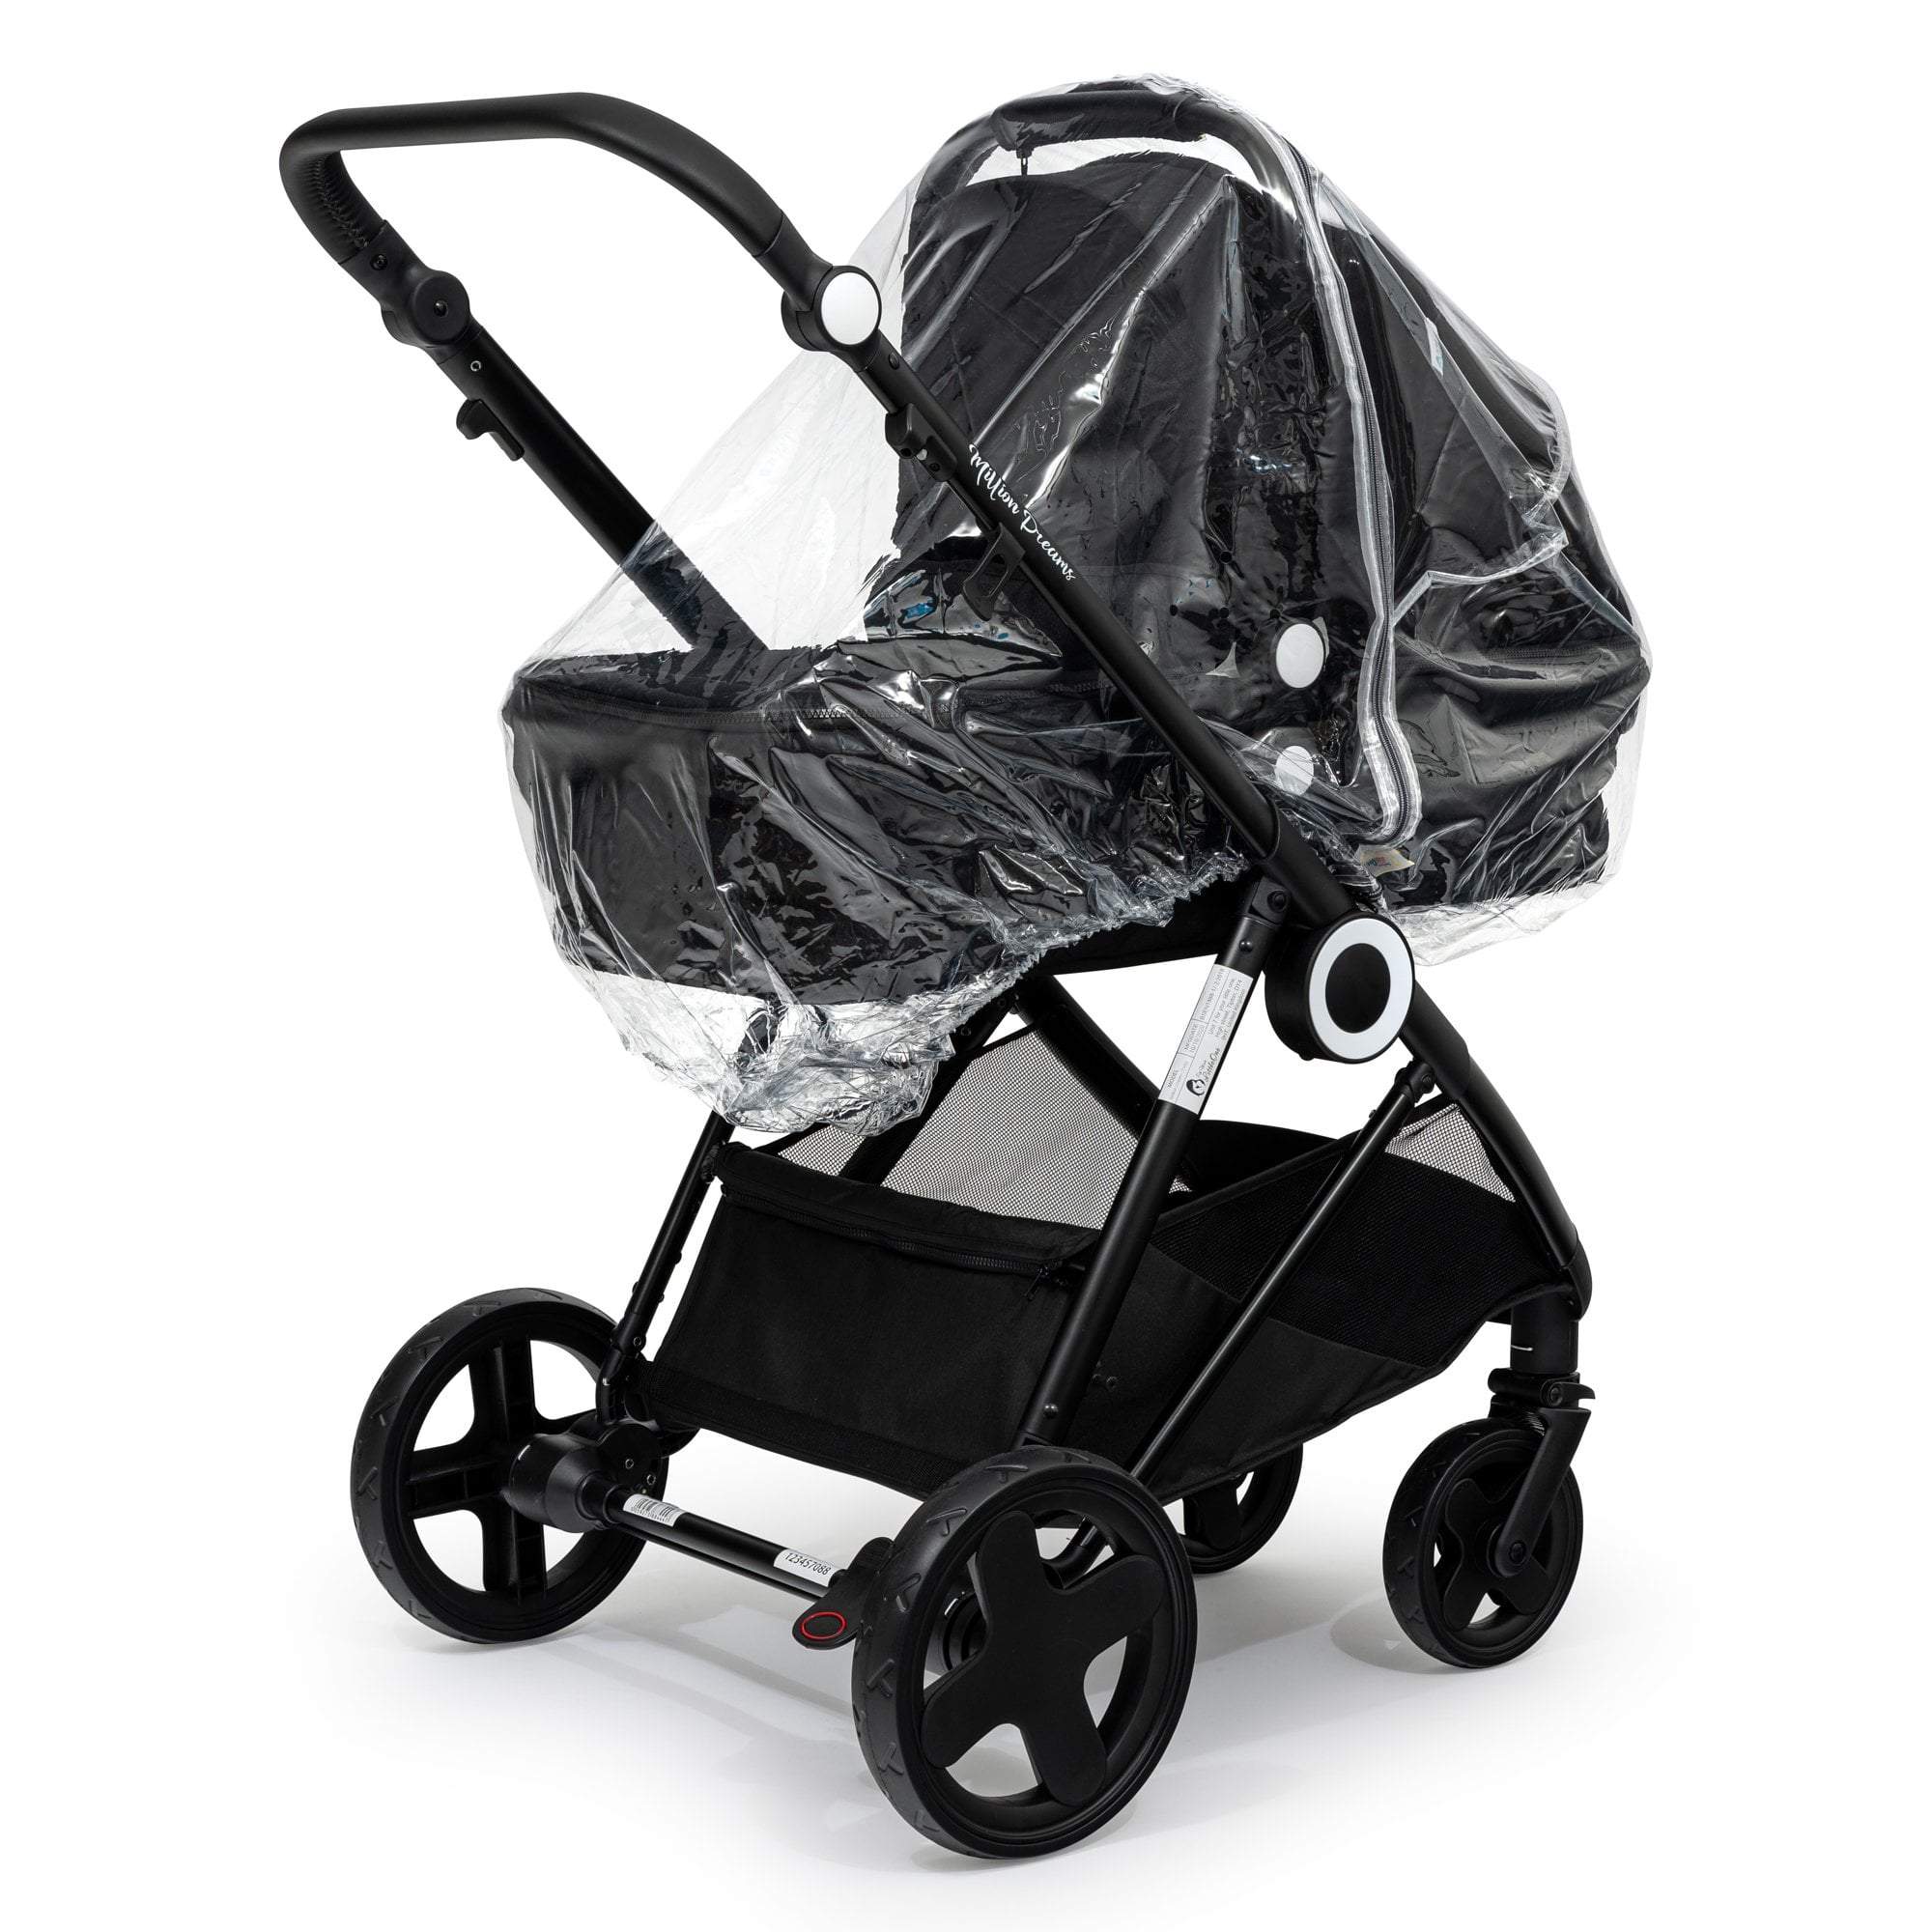 Carrycot Raincover Compatible With BabiesRus - Fits All Models - For Your Little One